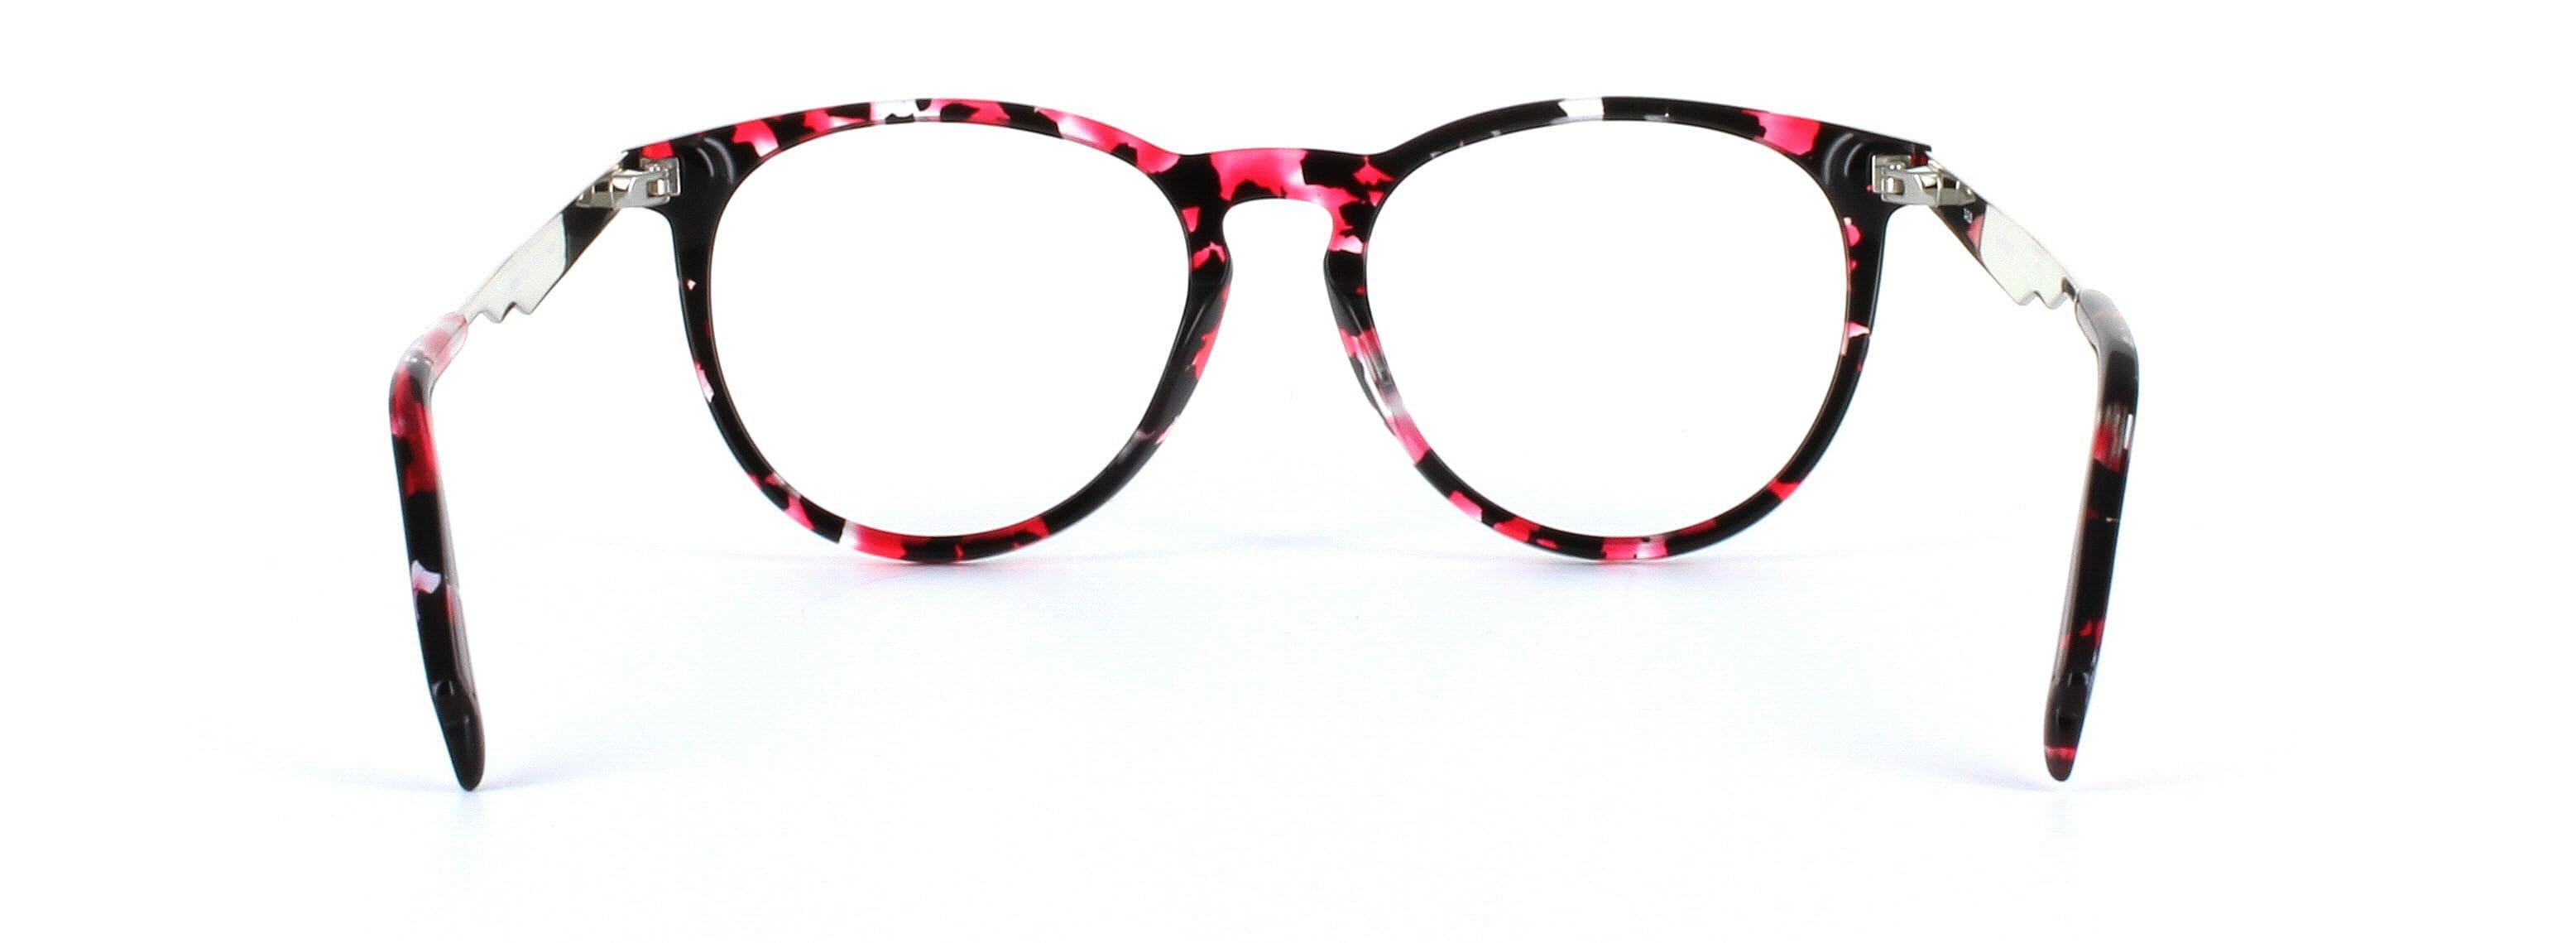 JUST CAVALLI (JC0879-55A) Black and Red Full Rim Round Acetate Glasses - Image View 3